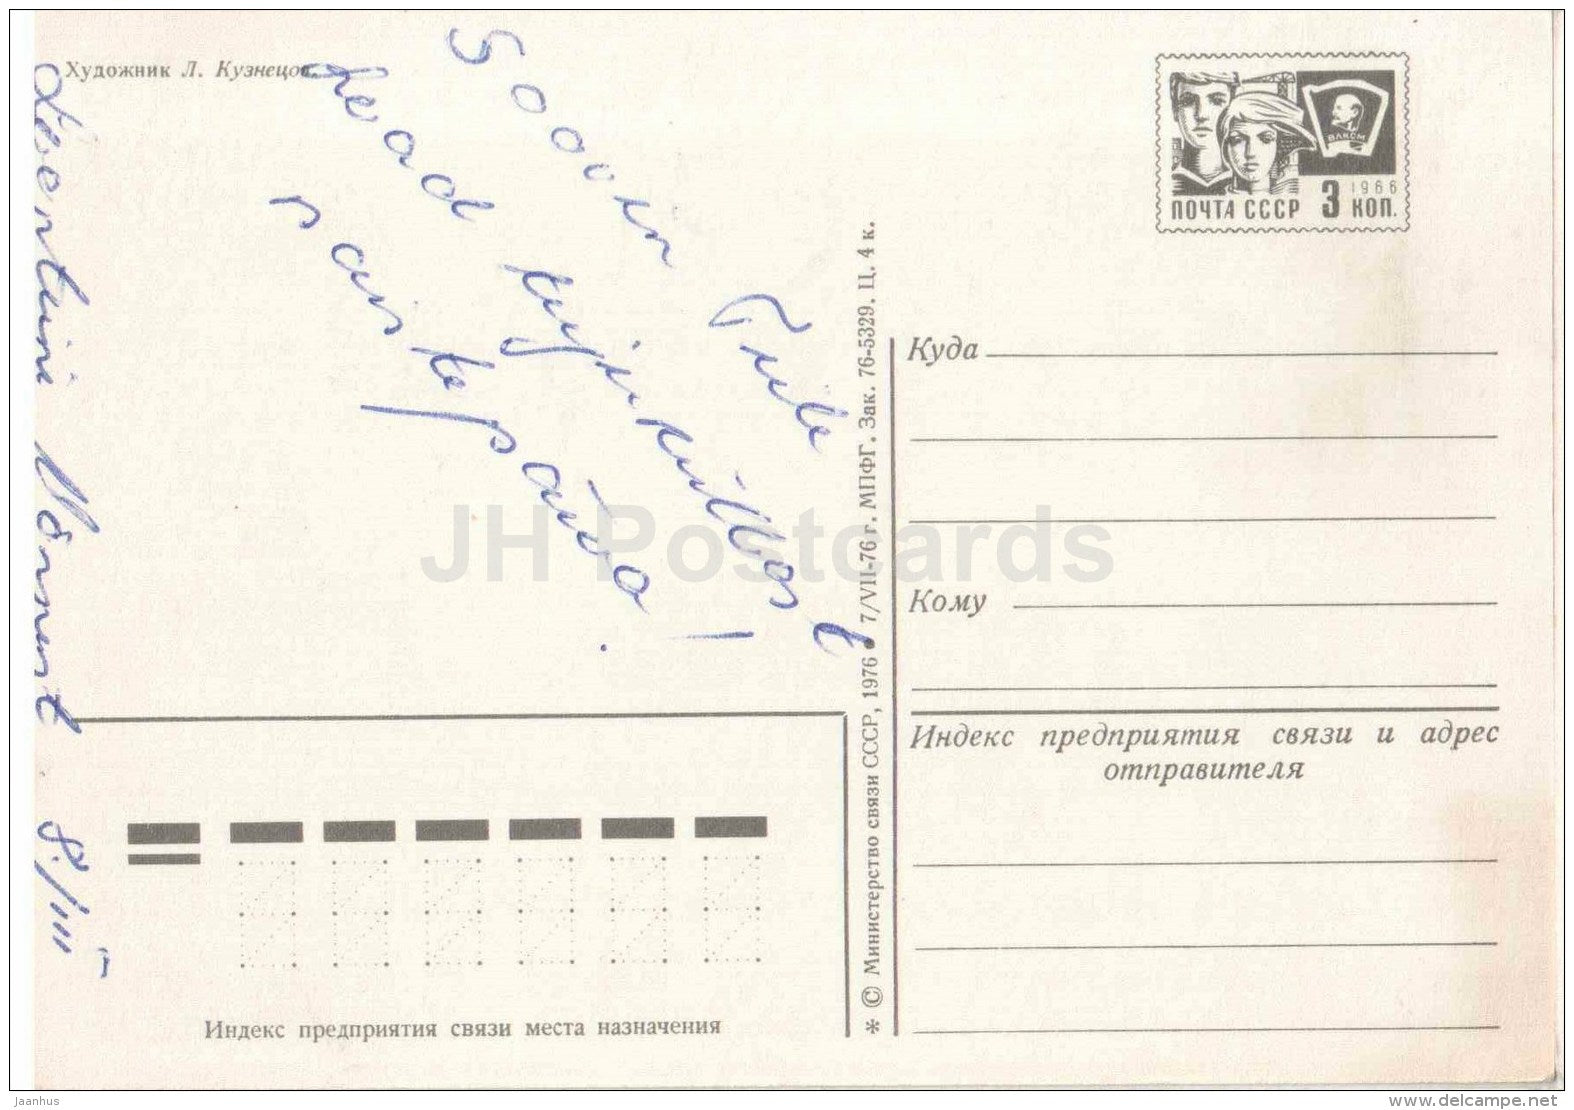 8 March International Women's Day greeting card - flowers in the vase - 1 postal stationery - 1976 - Russia USSR - used - JH Postcards